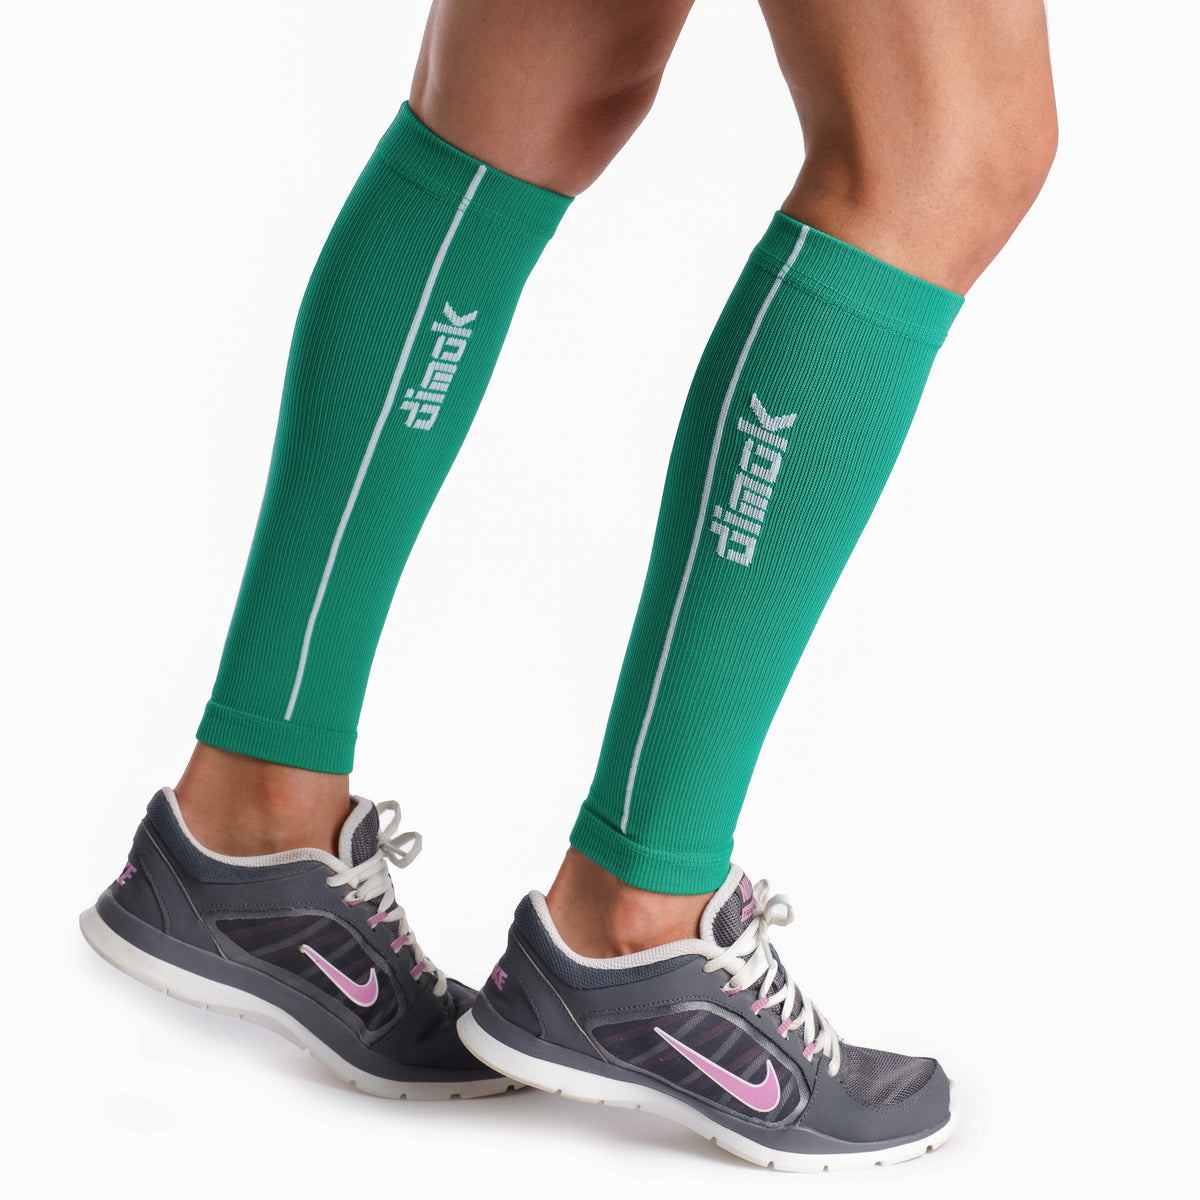 Colorful Graduated Calf Compression Sleeves Calf Support Footless Socks